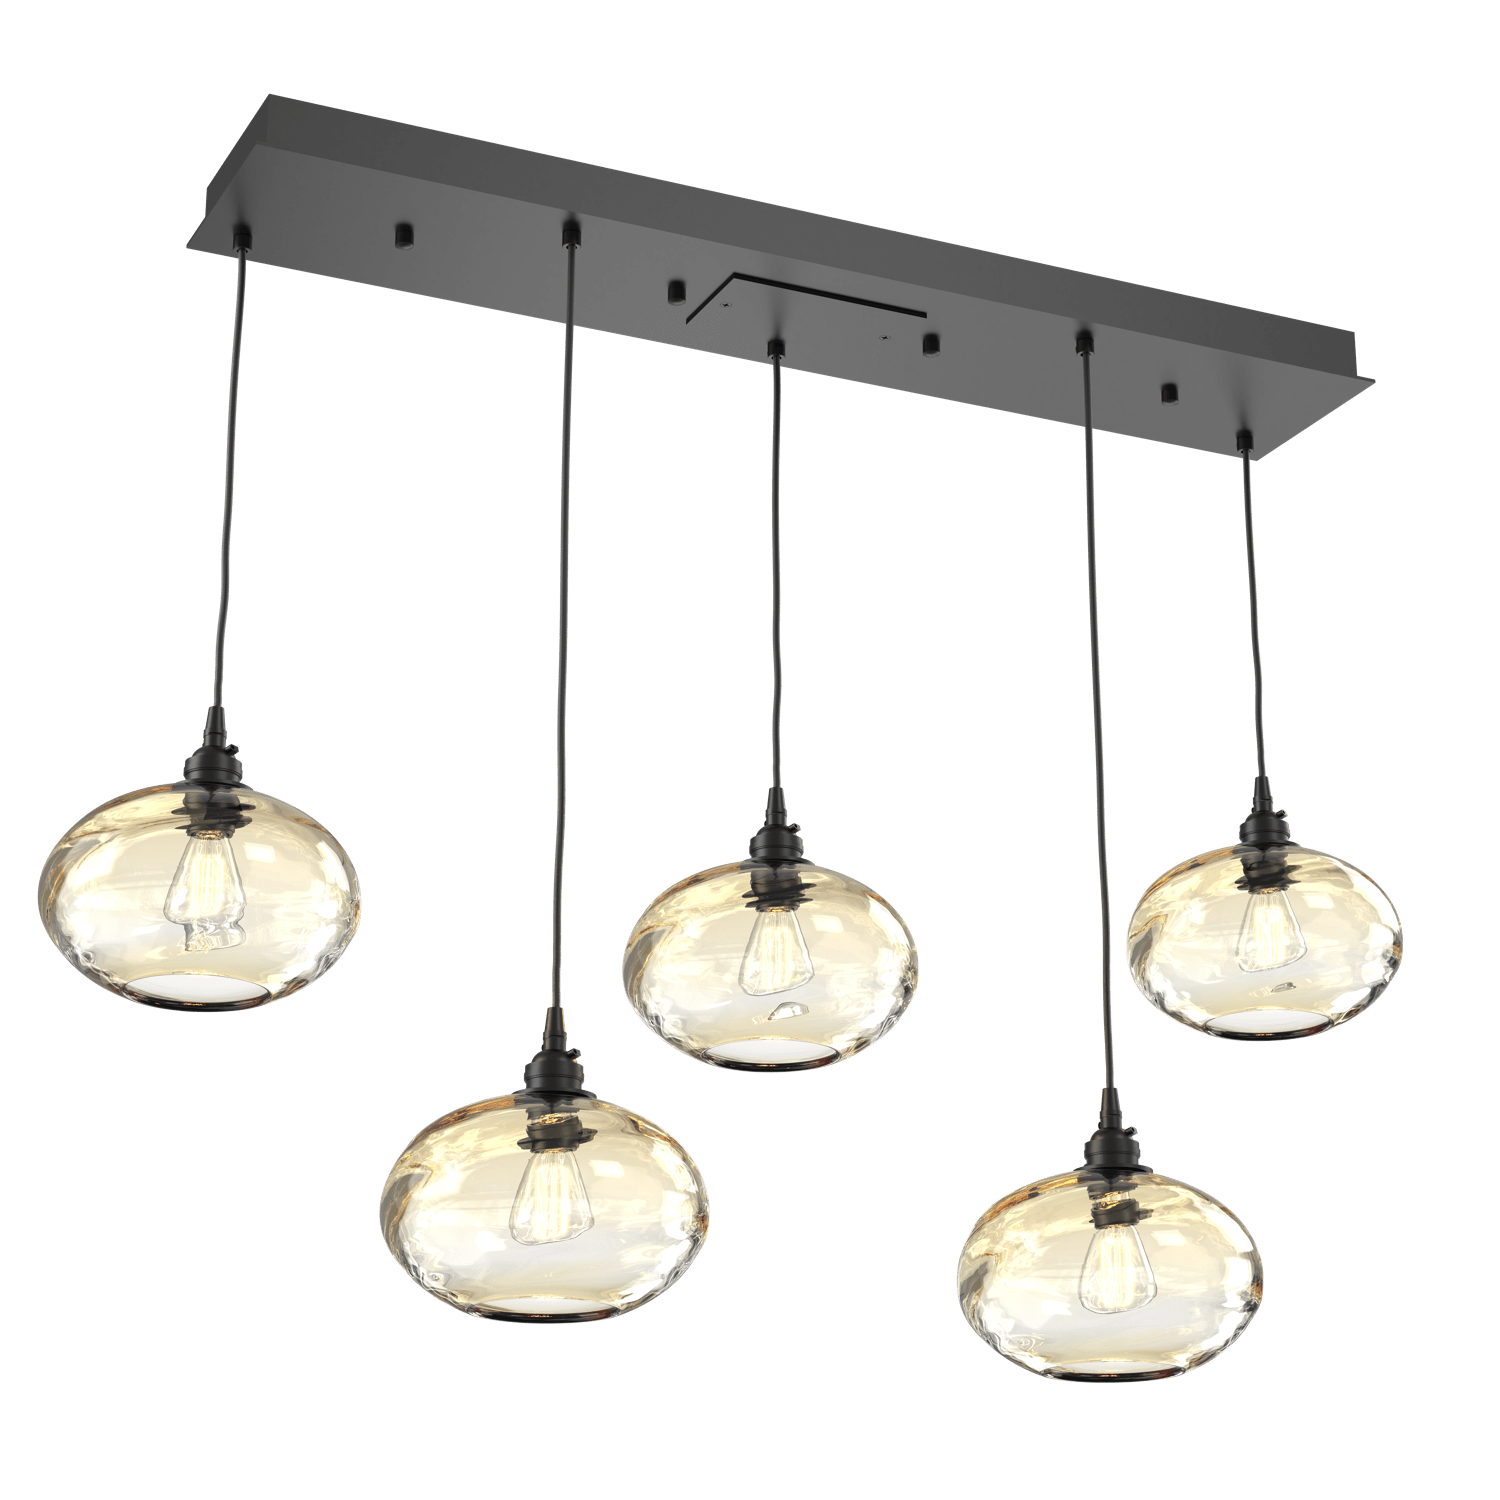 PLB0036-05-MB-OA-Hammerton-Studio-Optic-Blown-Glass-Coppa-5-light-linear-pendant-chandelier-with-matte-black-finish-and-optic-amber-blown-glass-shades-and-incandescent-lamping